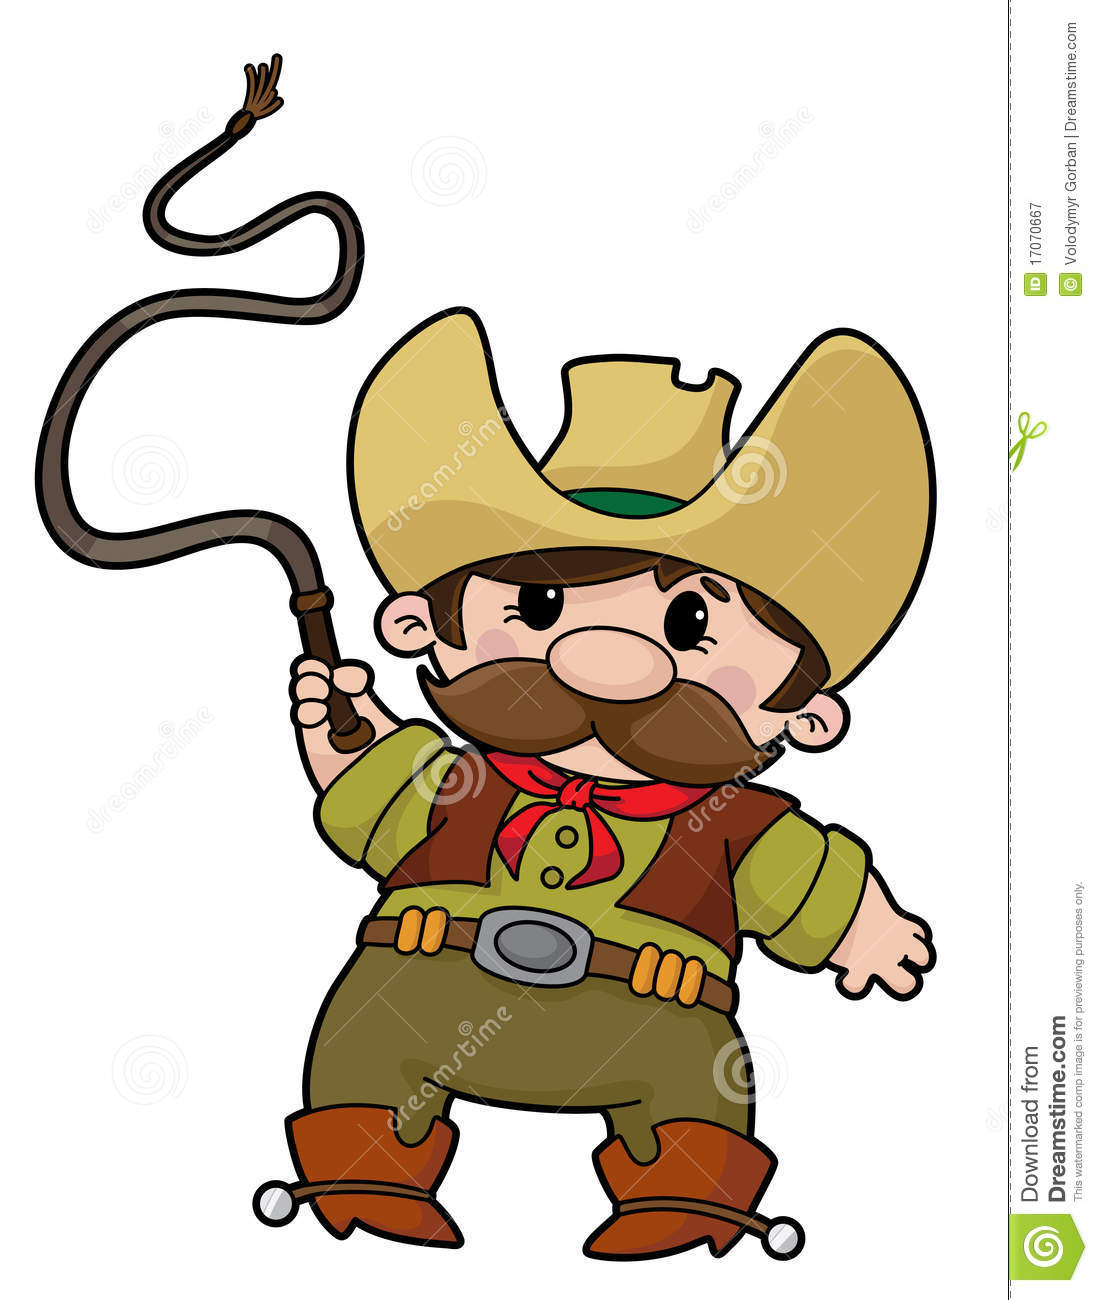 Cowboy With Whip Royalty Free Stock Photography   Image  17070667